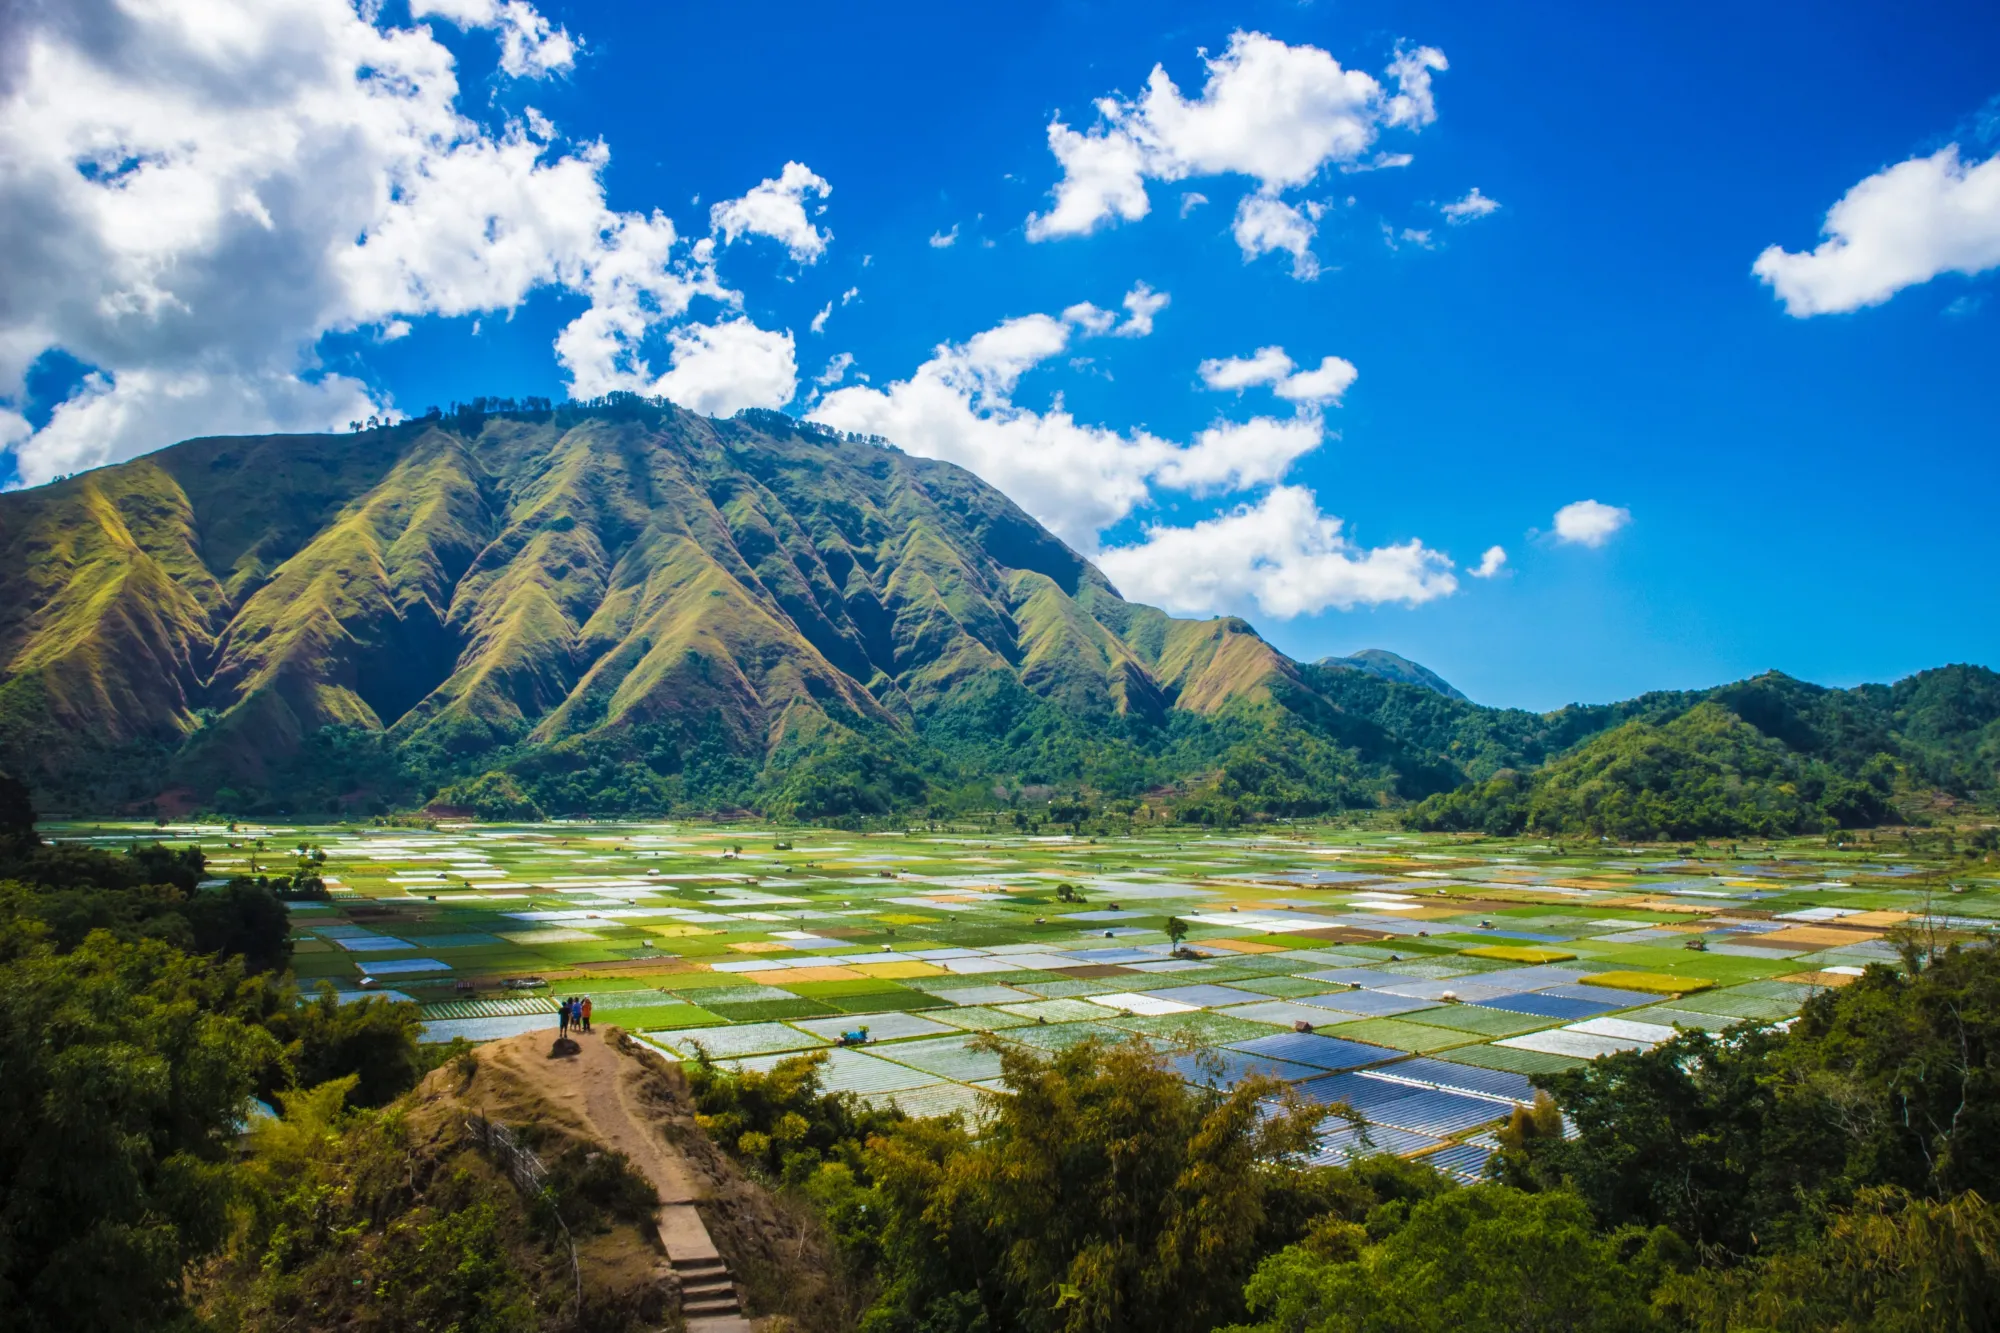 View of Lombok's rice fields in Indonesia